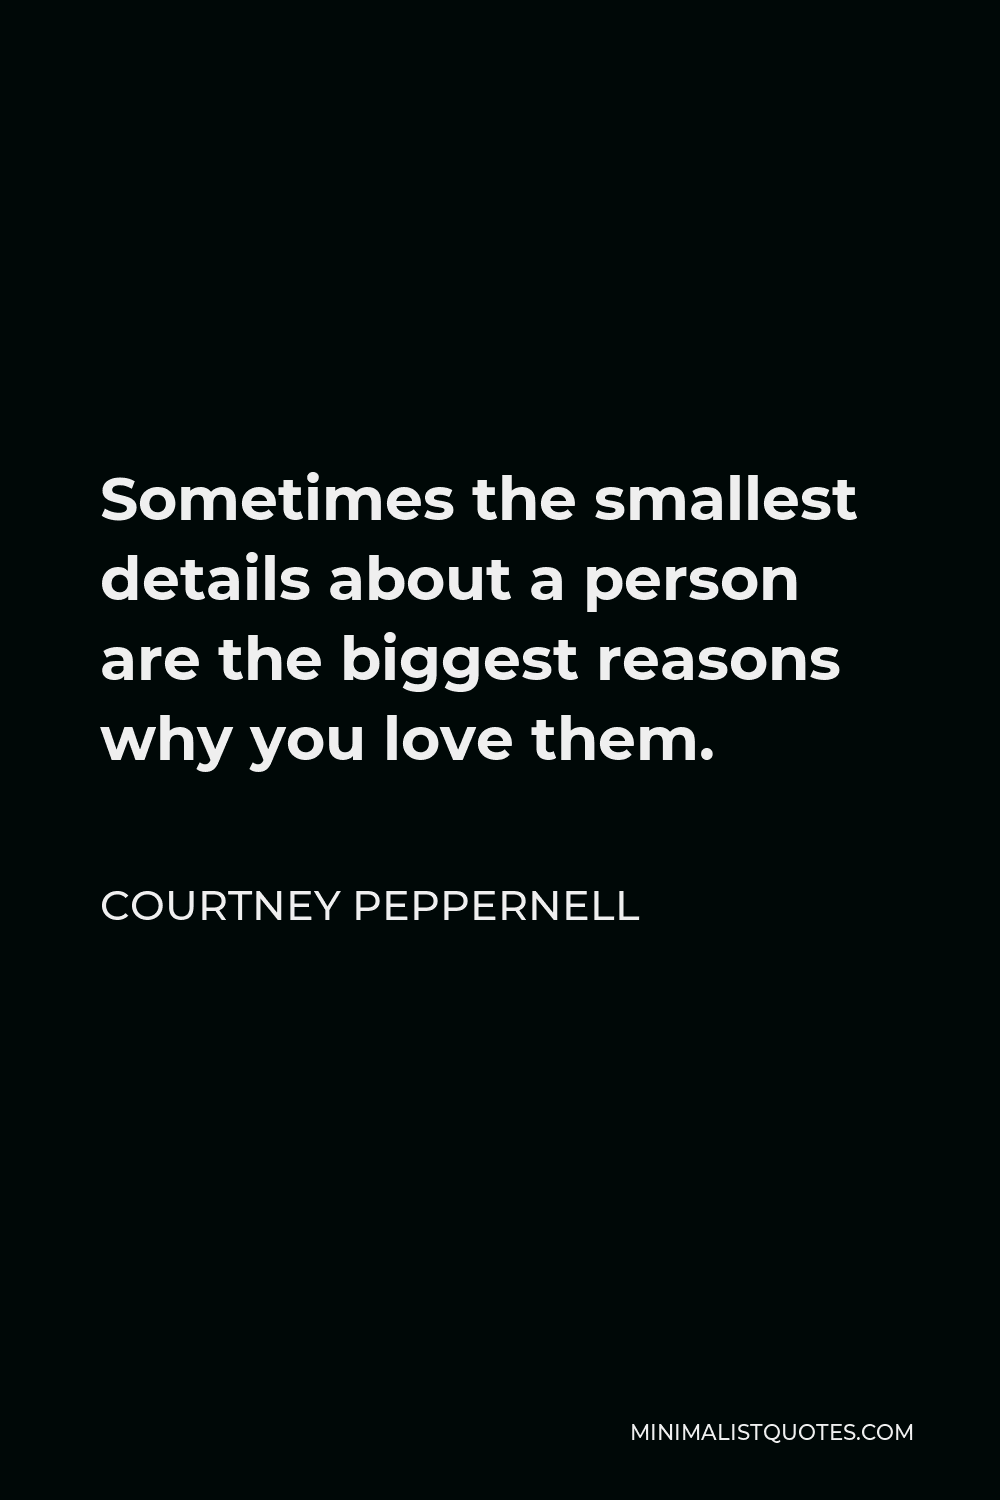 Courtney Peppernell Quote - Sometimes the smallest details about a person are the biggest reasons why you love them.